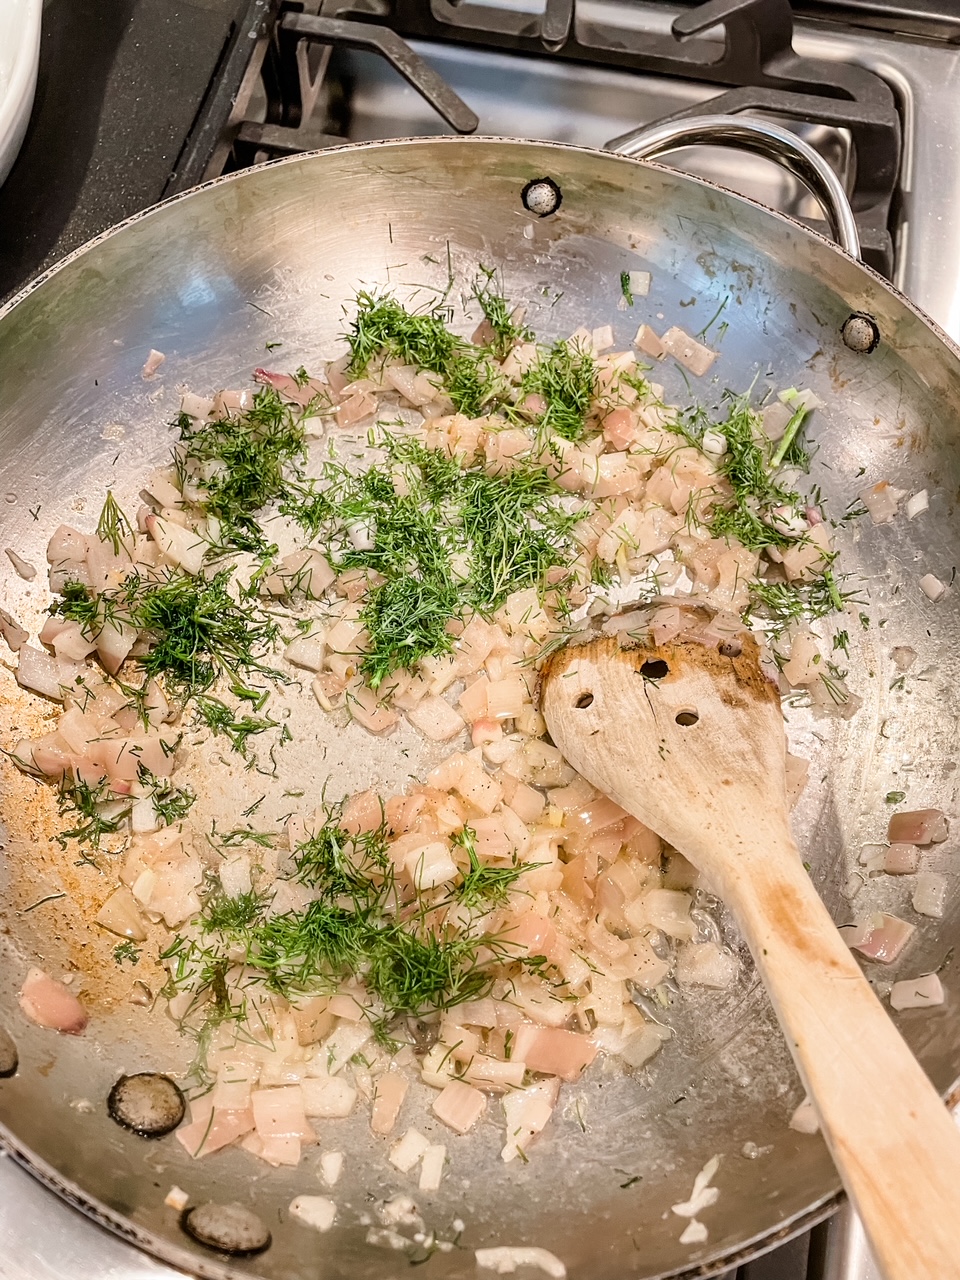 The shallots, butter, lemon, and dill being sauteed